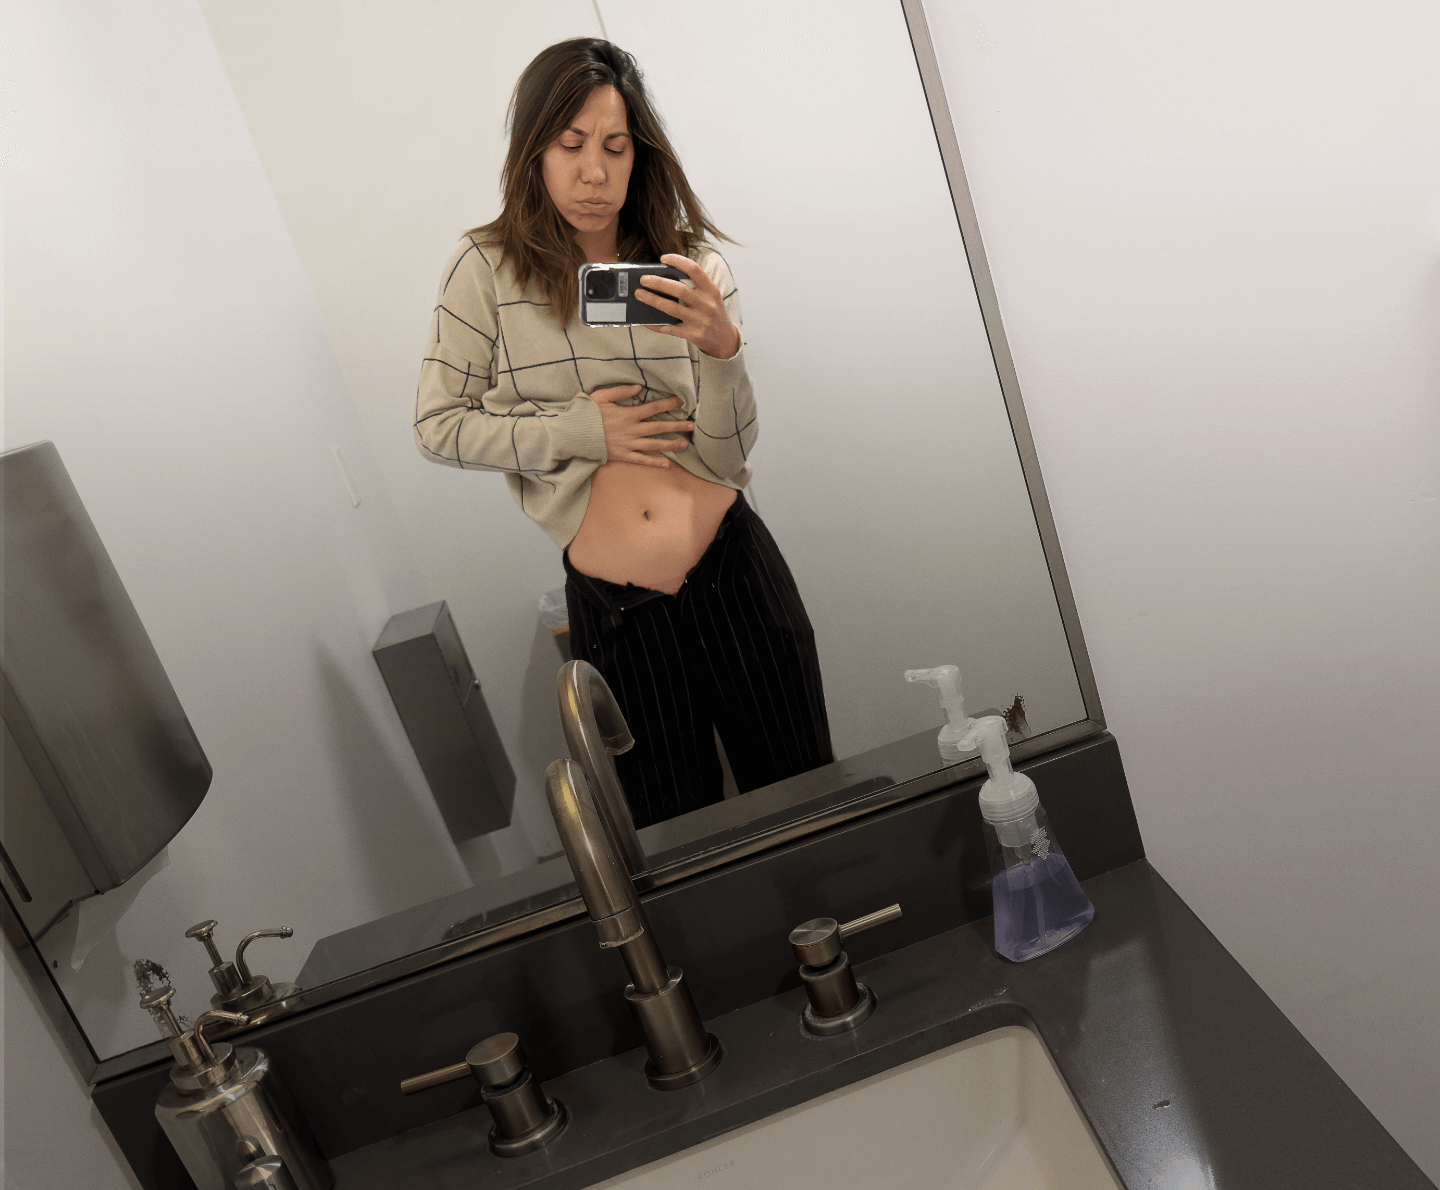 Actor portrayal of a woman living with endometriosis pain who is looking at her stomach in a bathroom mirror